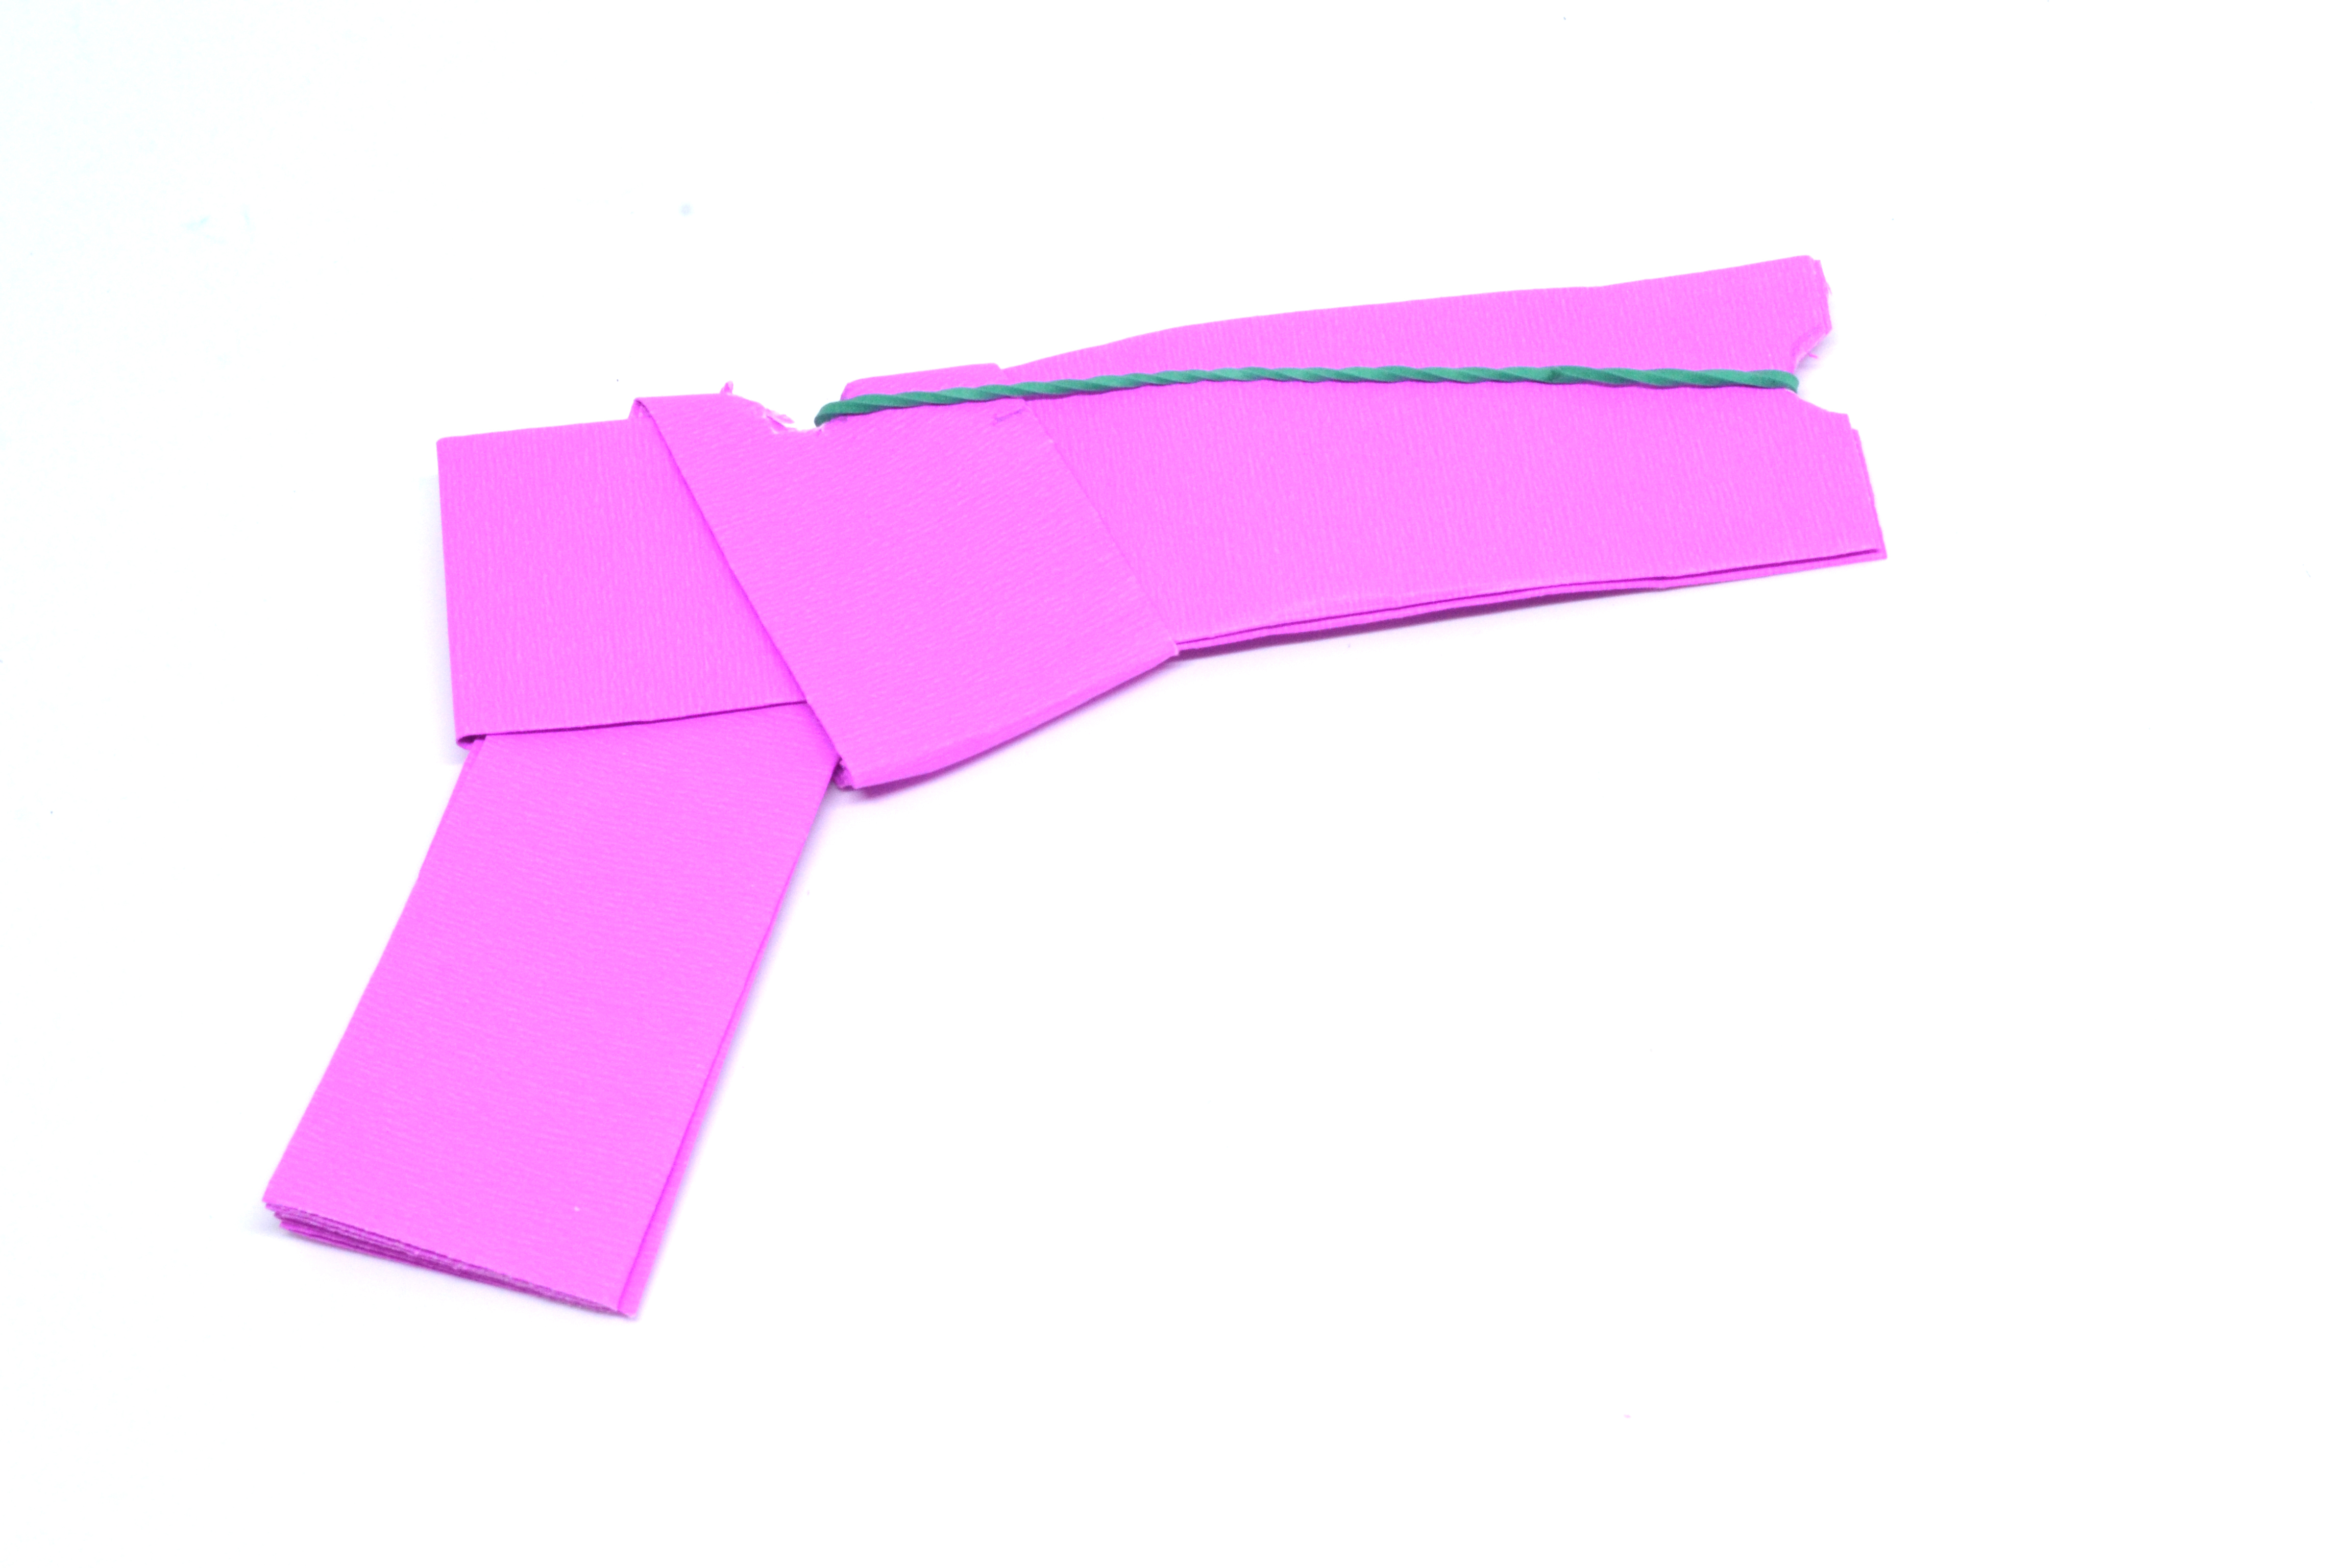 How To Make A Origami Gun 2 Simple Ways To Make A Paper Gun That Shoots Wikihow